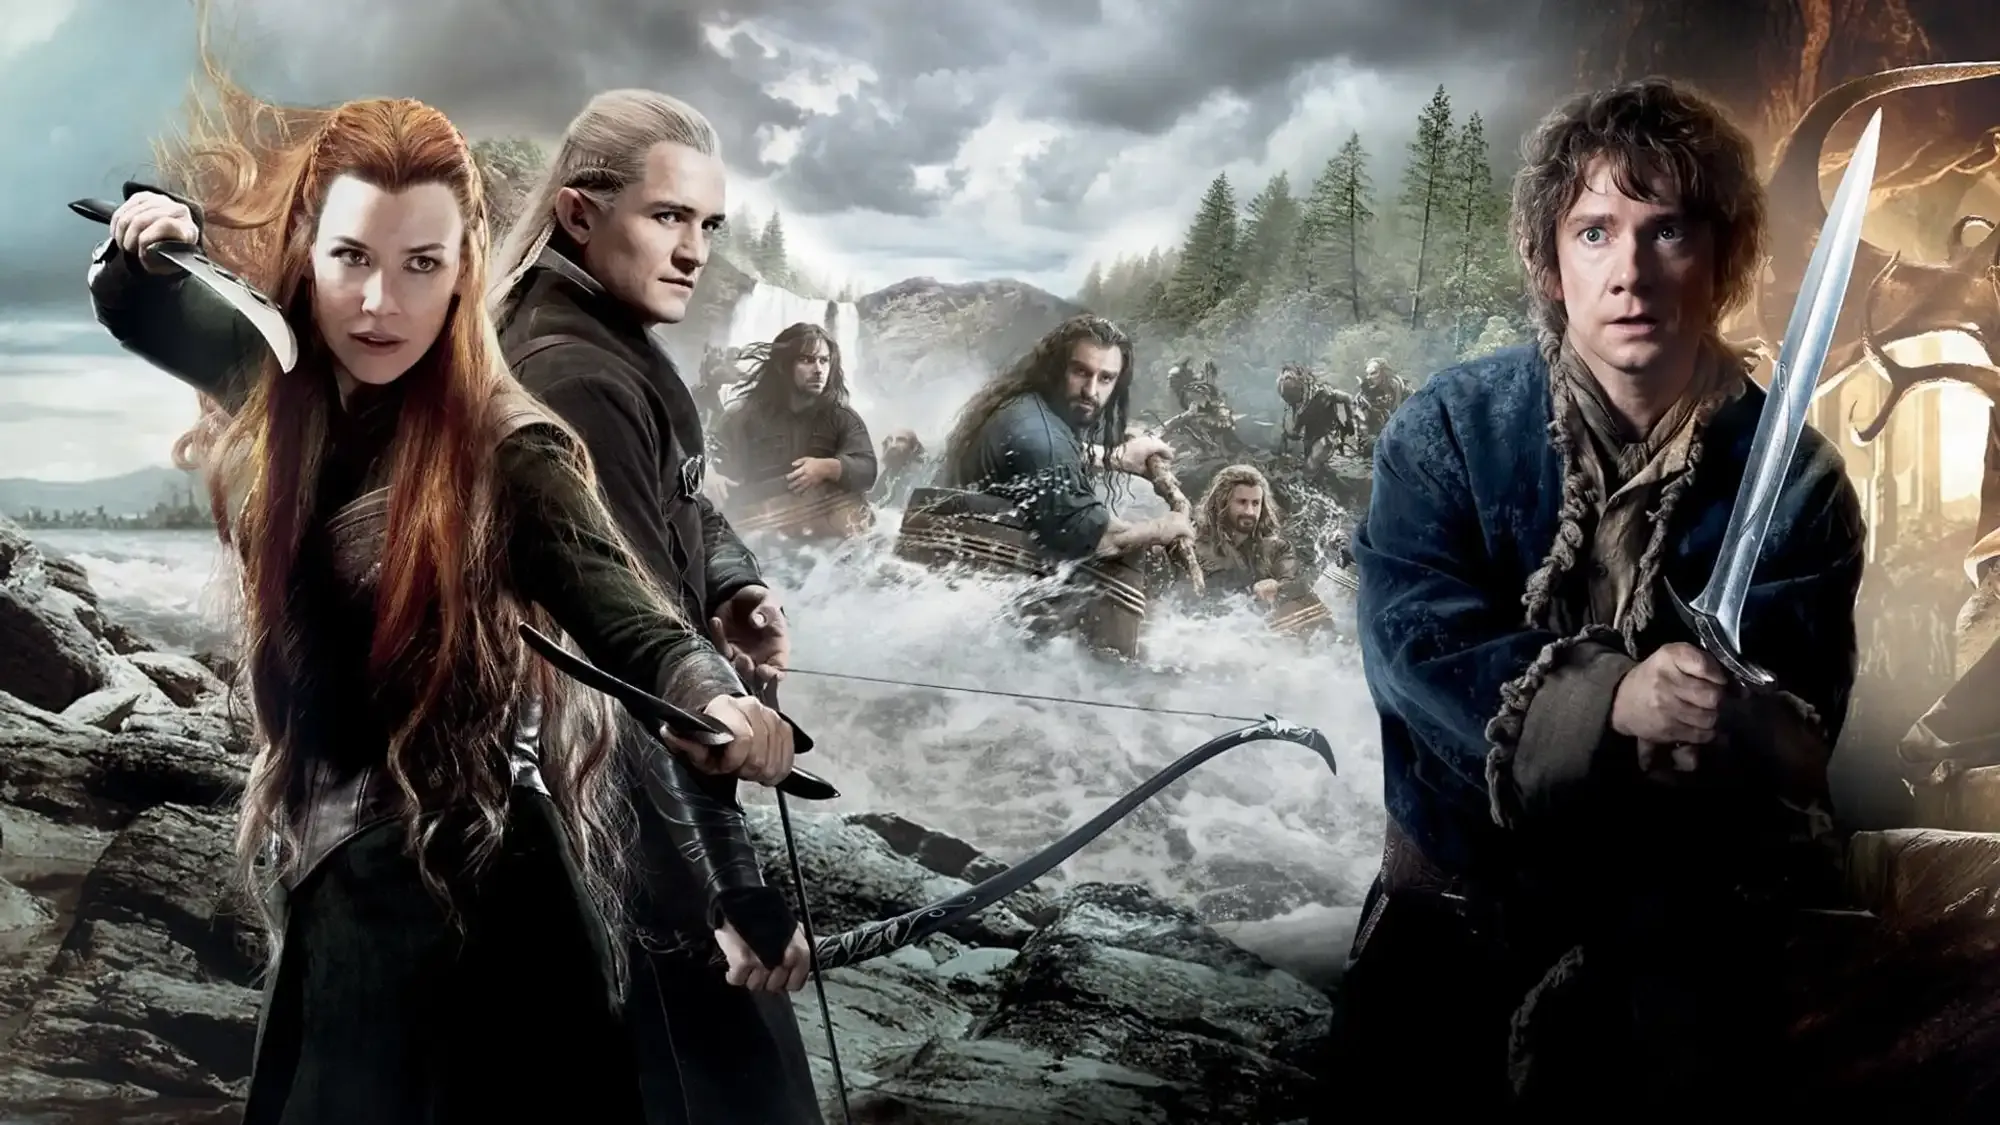 The Hobbit: The Desolation of Smaug movie review